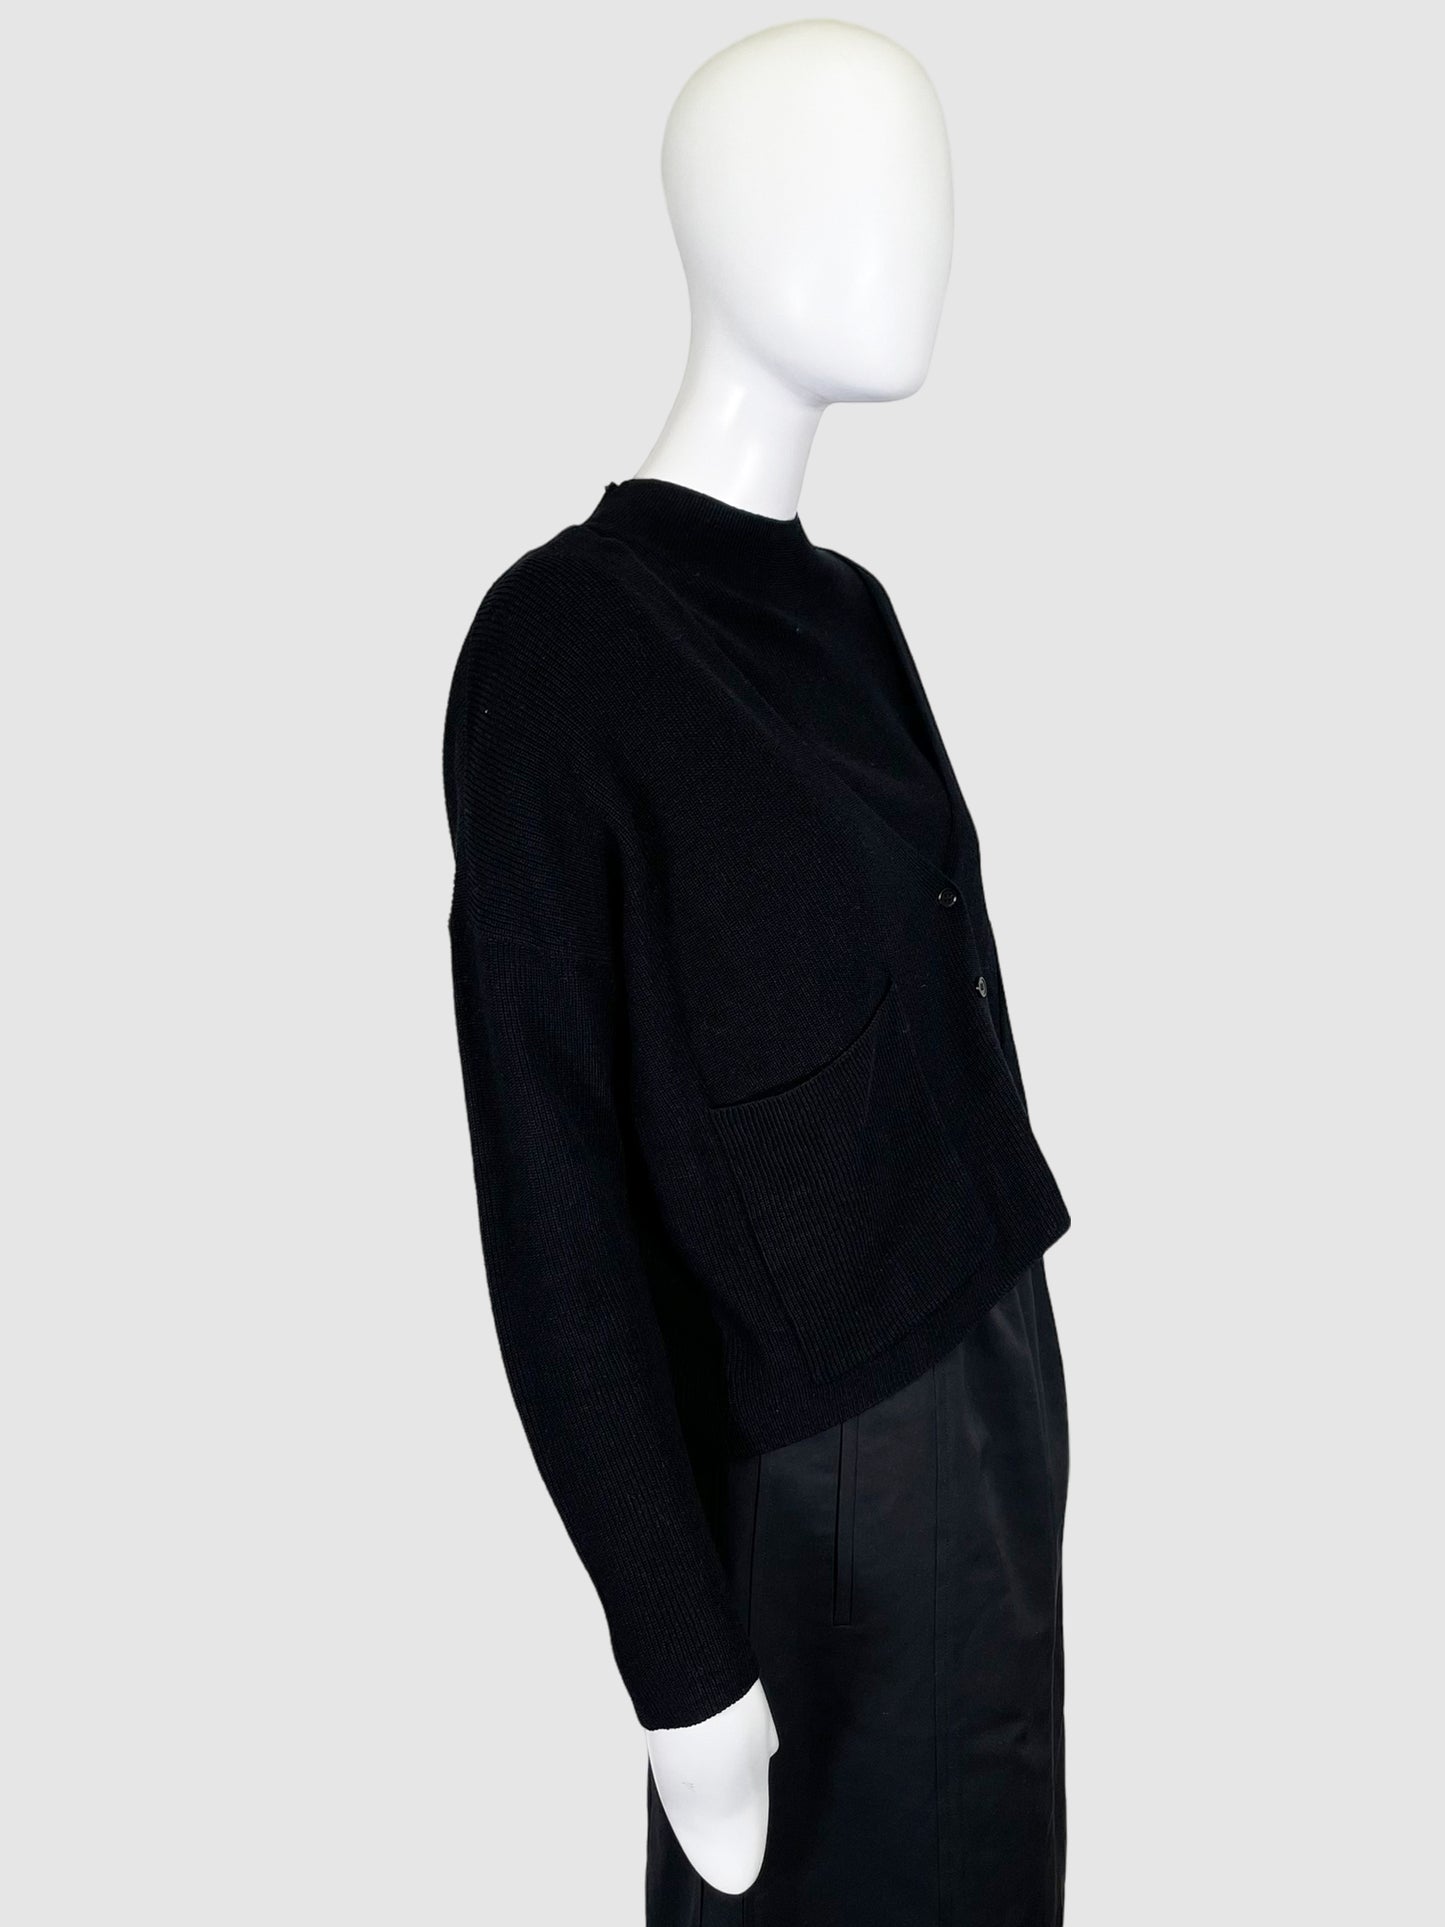 Eileen Fisher Black Knitted 2-piece set - Size M